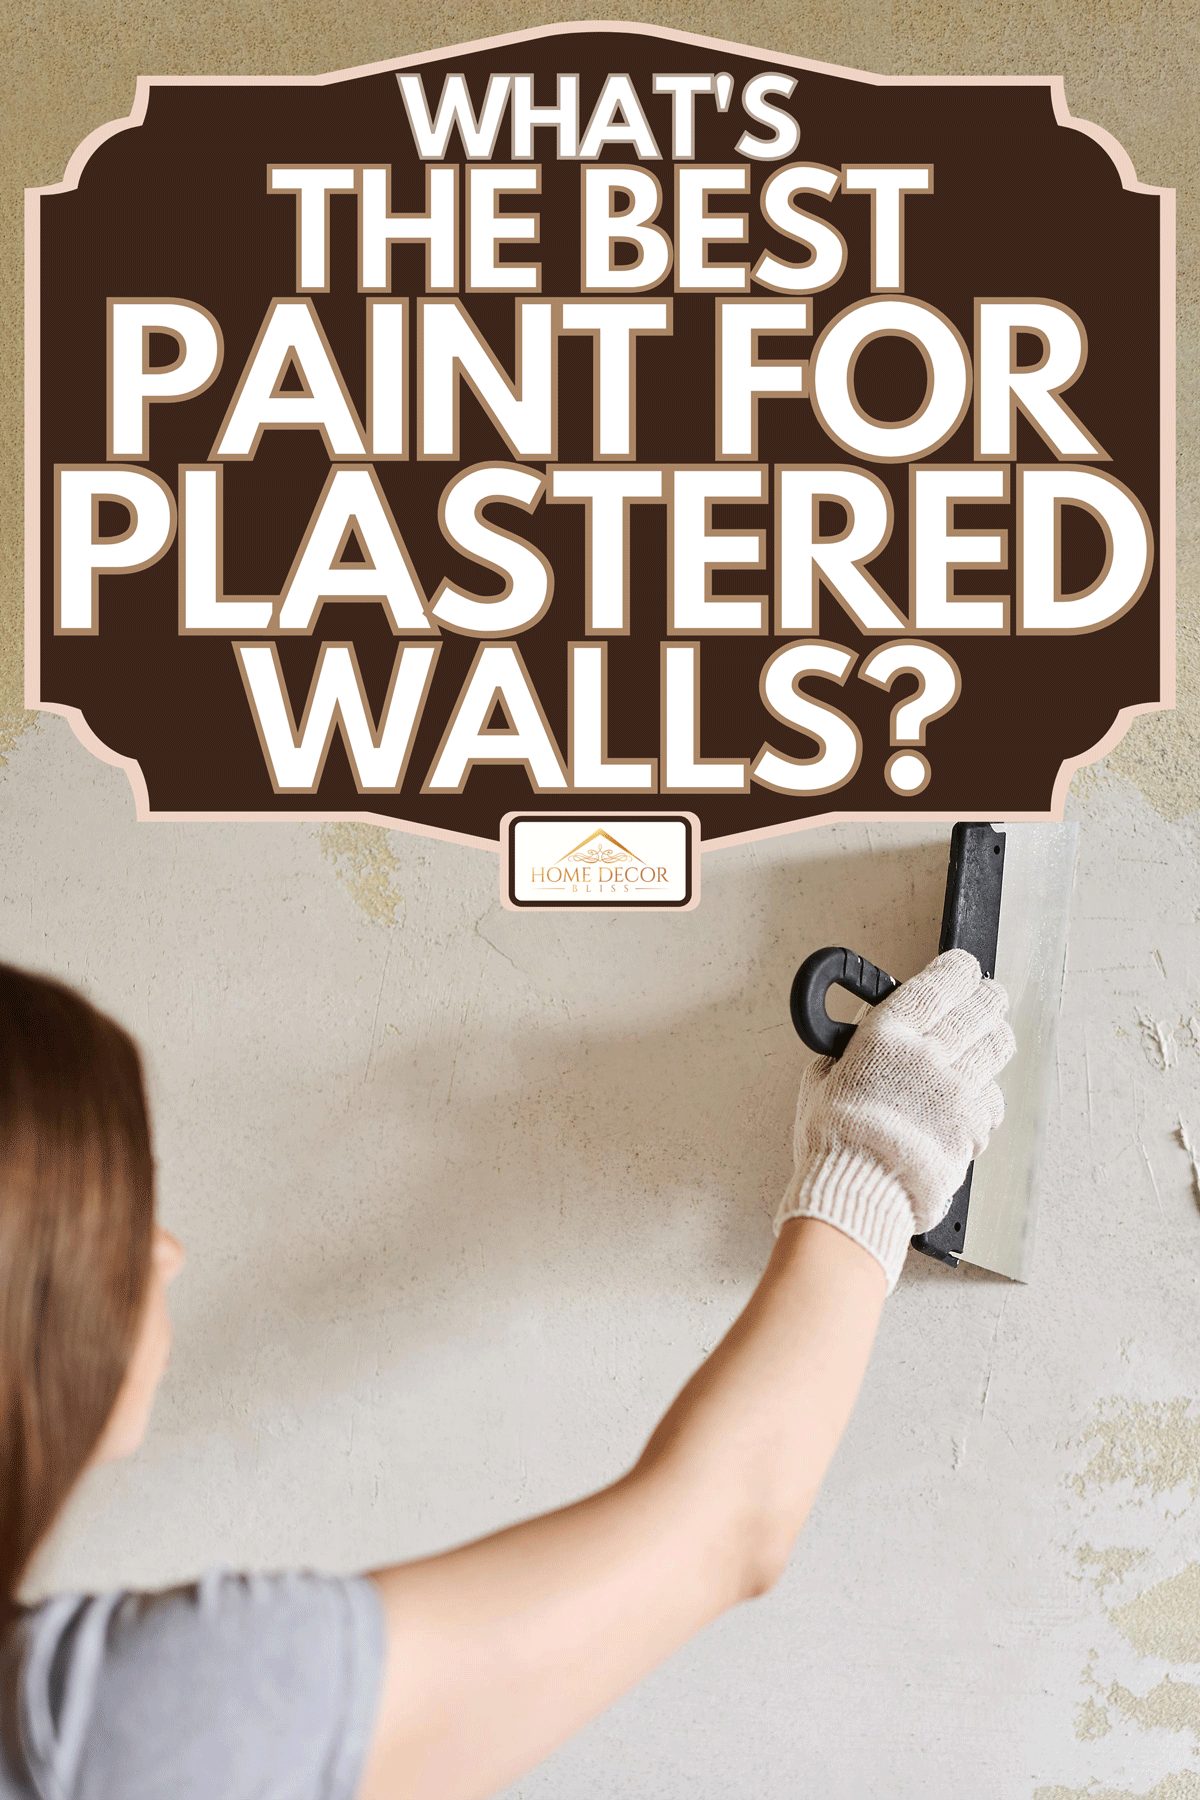 A woman plastering the walls with finishing putty in the room with putty knife, What's The Best Paint For Plastered Walls?